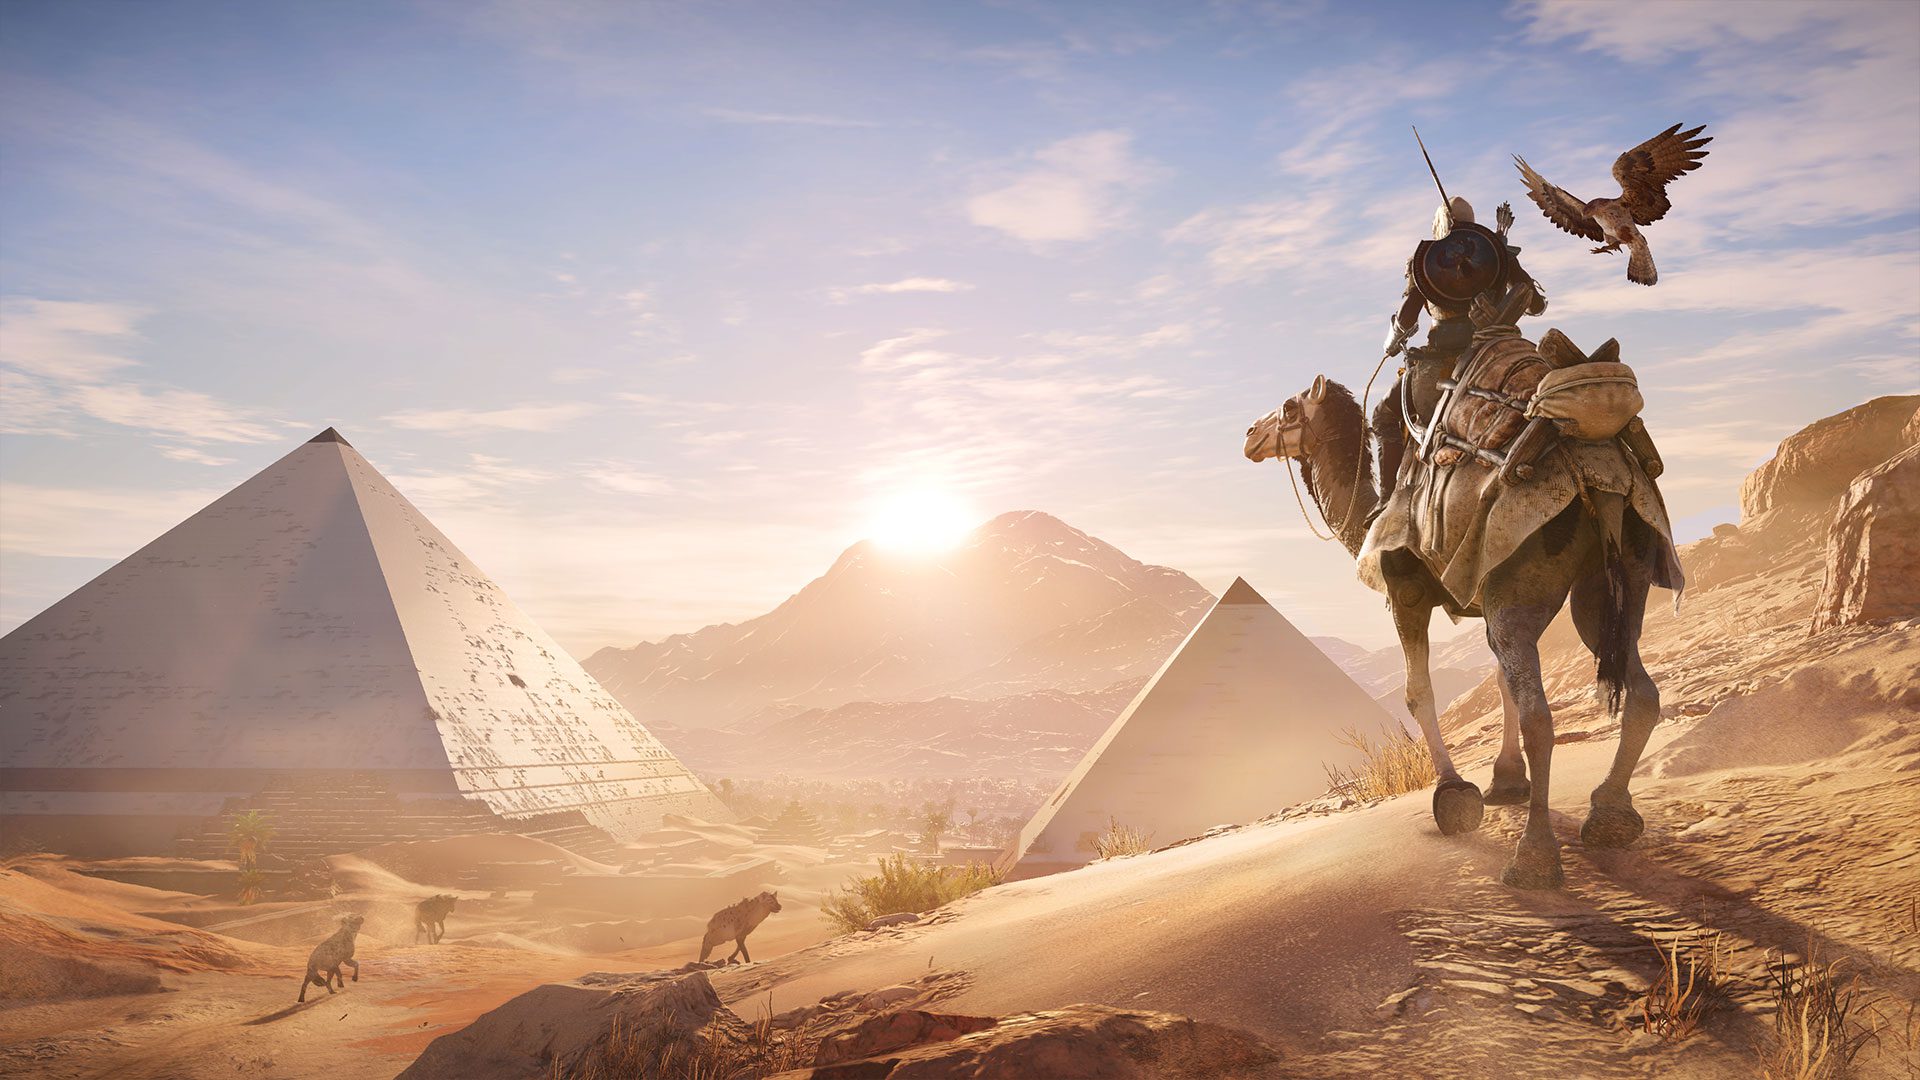 Play Assassin’s Creed Origins Free This Weekend